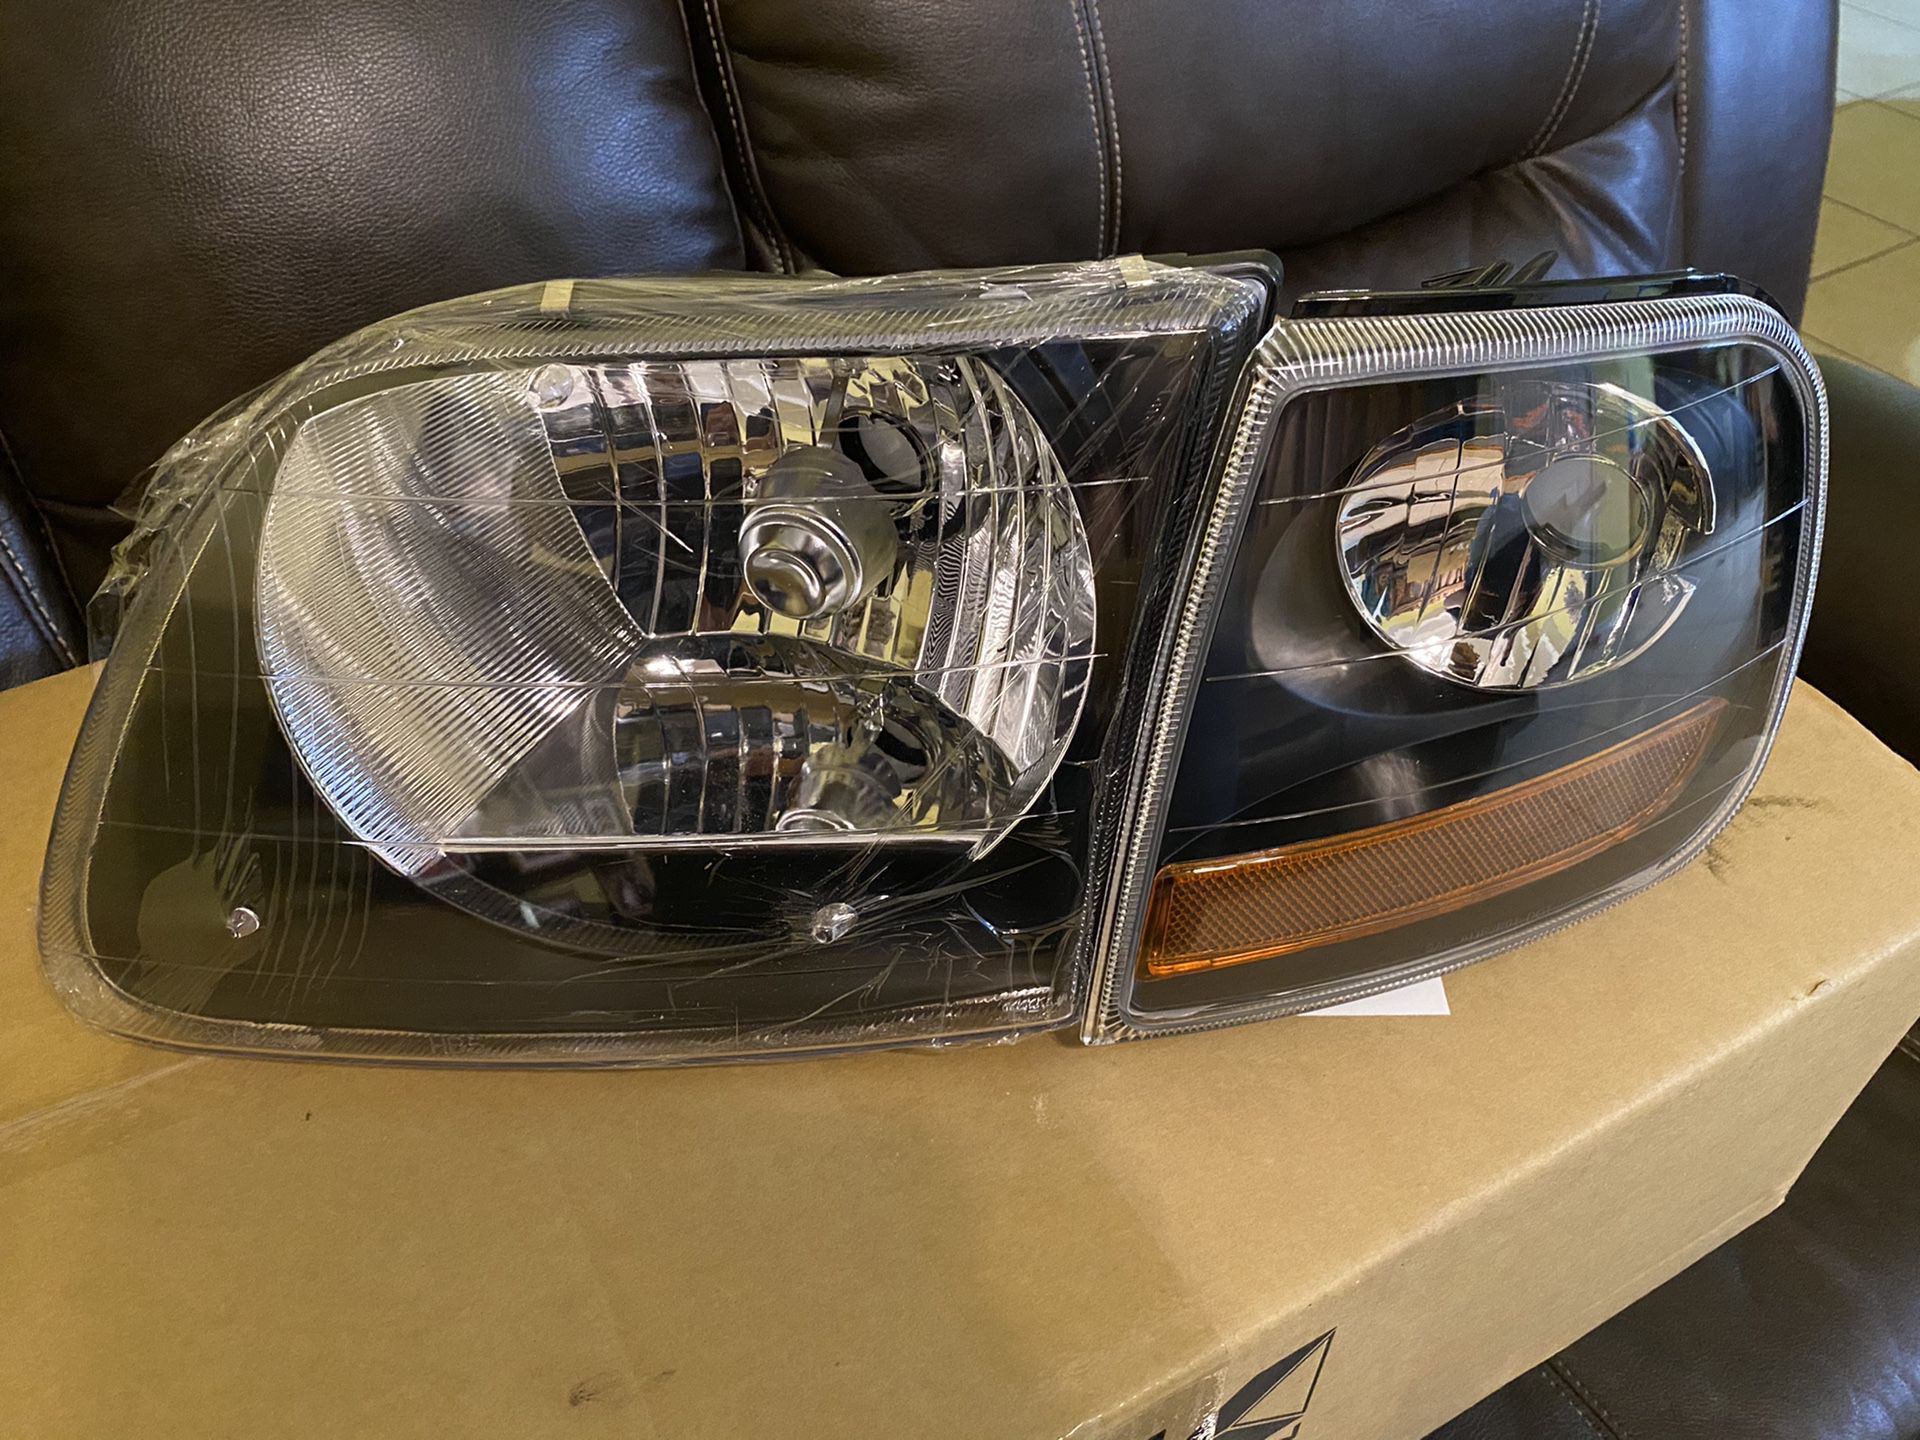 Headlights for Ford F-{contact info removed} $140 for the pair